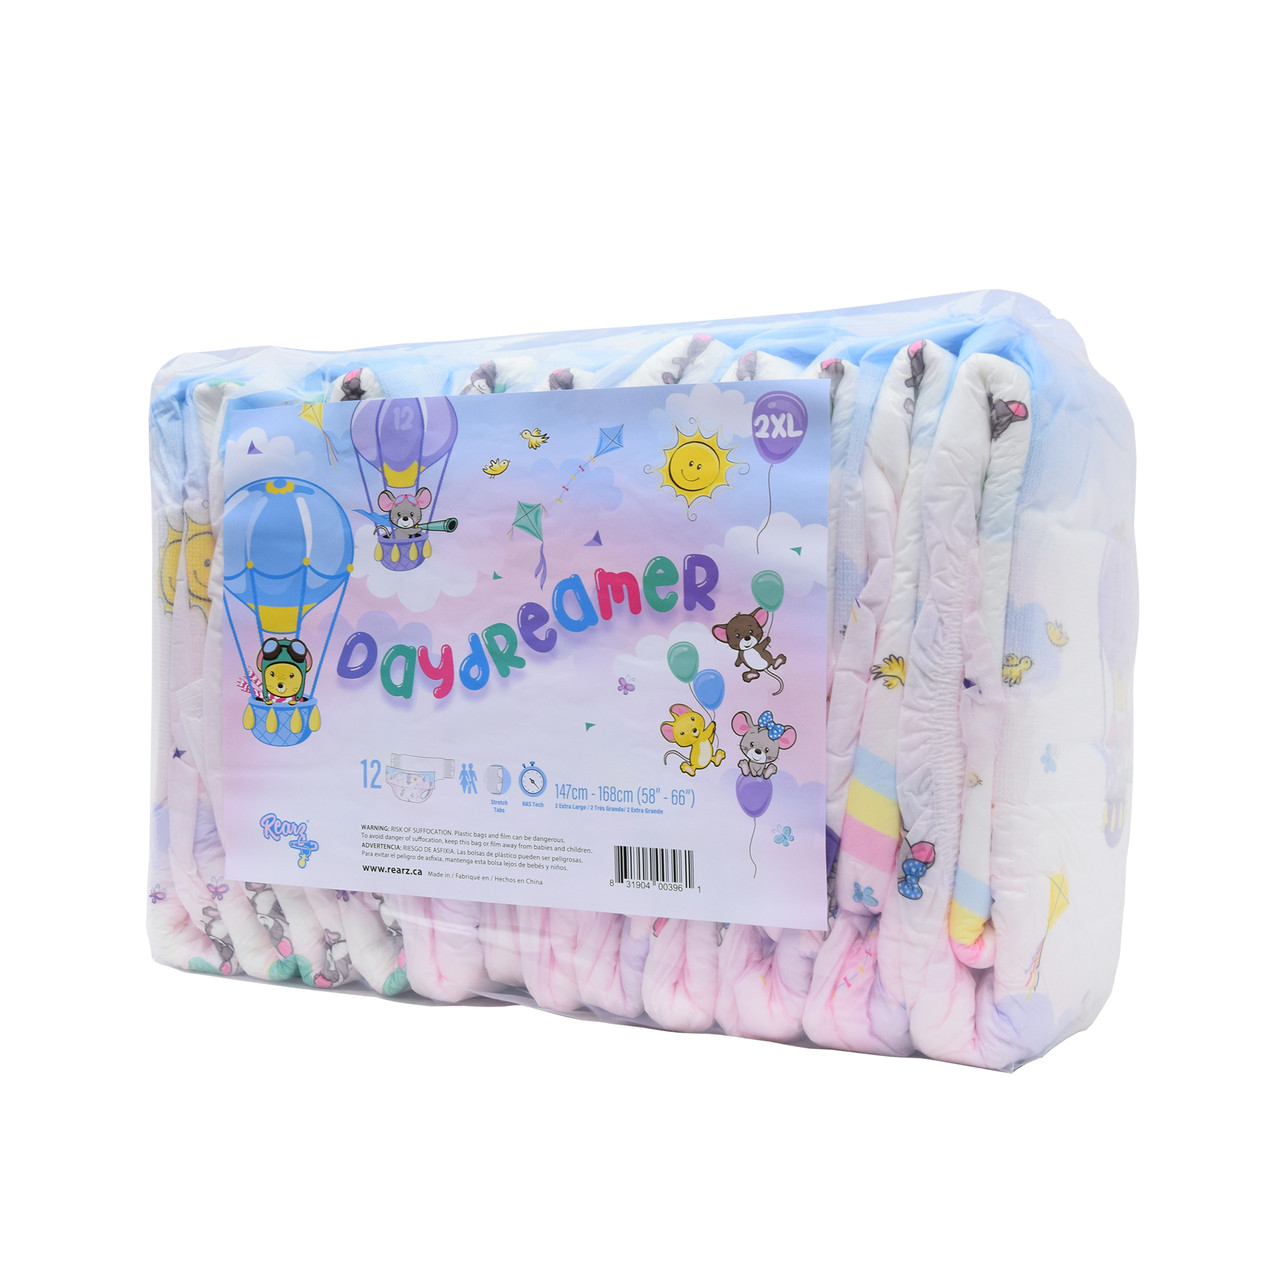 Rearz *NEW* Daydreamer Adult overnight diaper - Case of 36